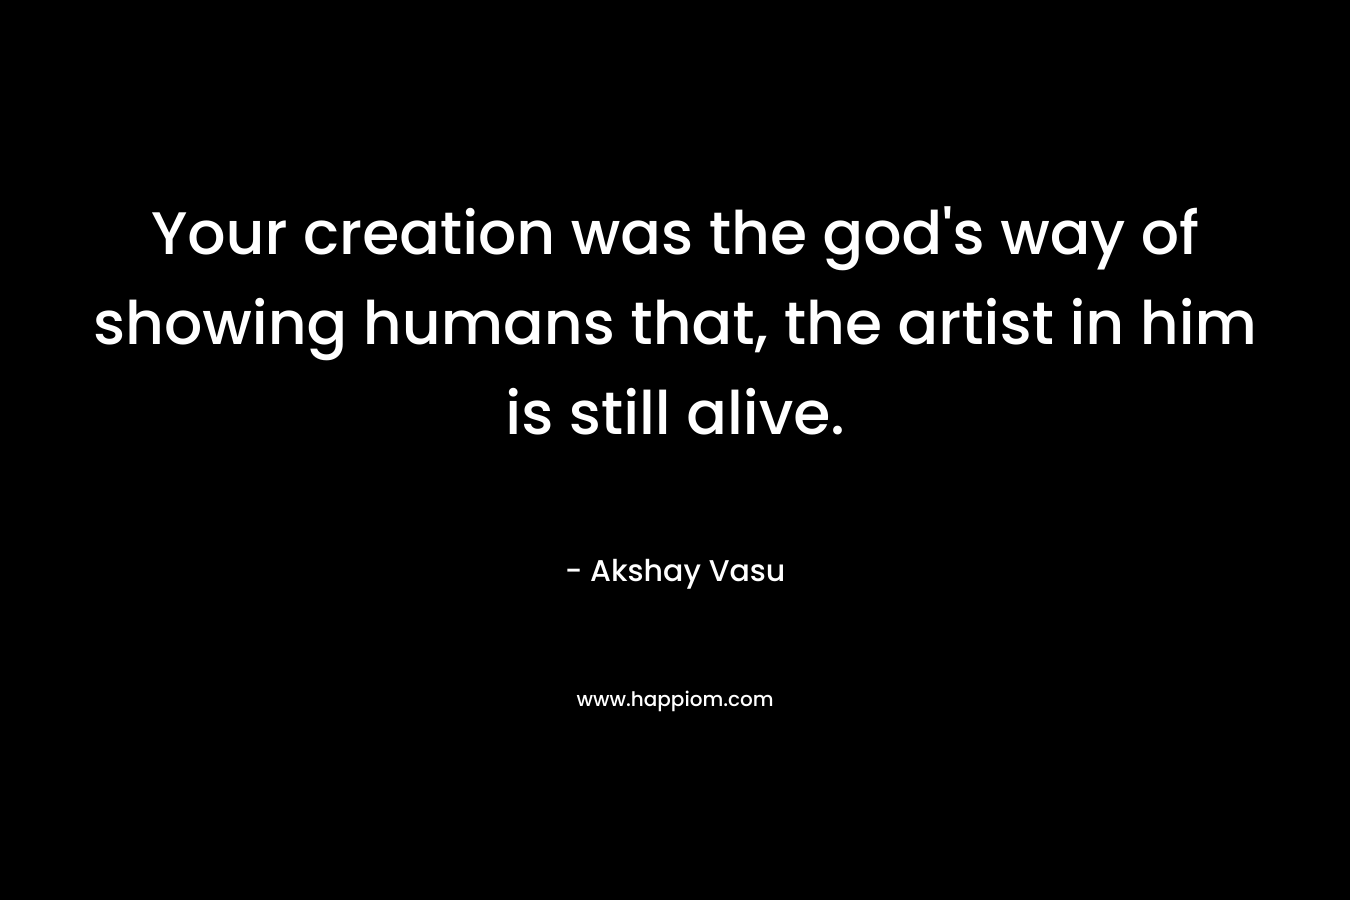 Your creation was the god's way of showing humans that, the artist in him is still alive.